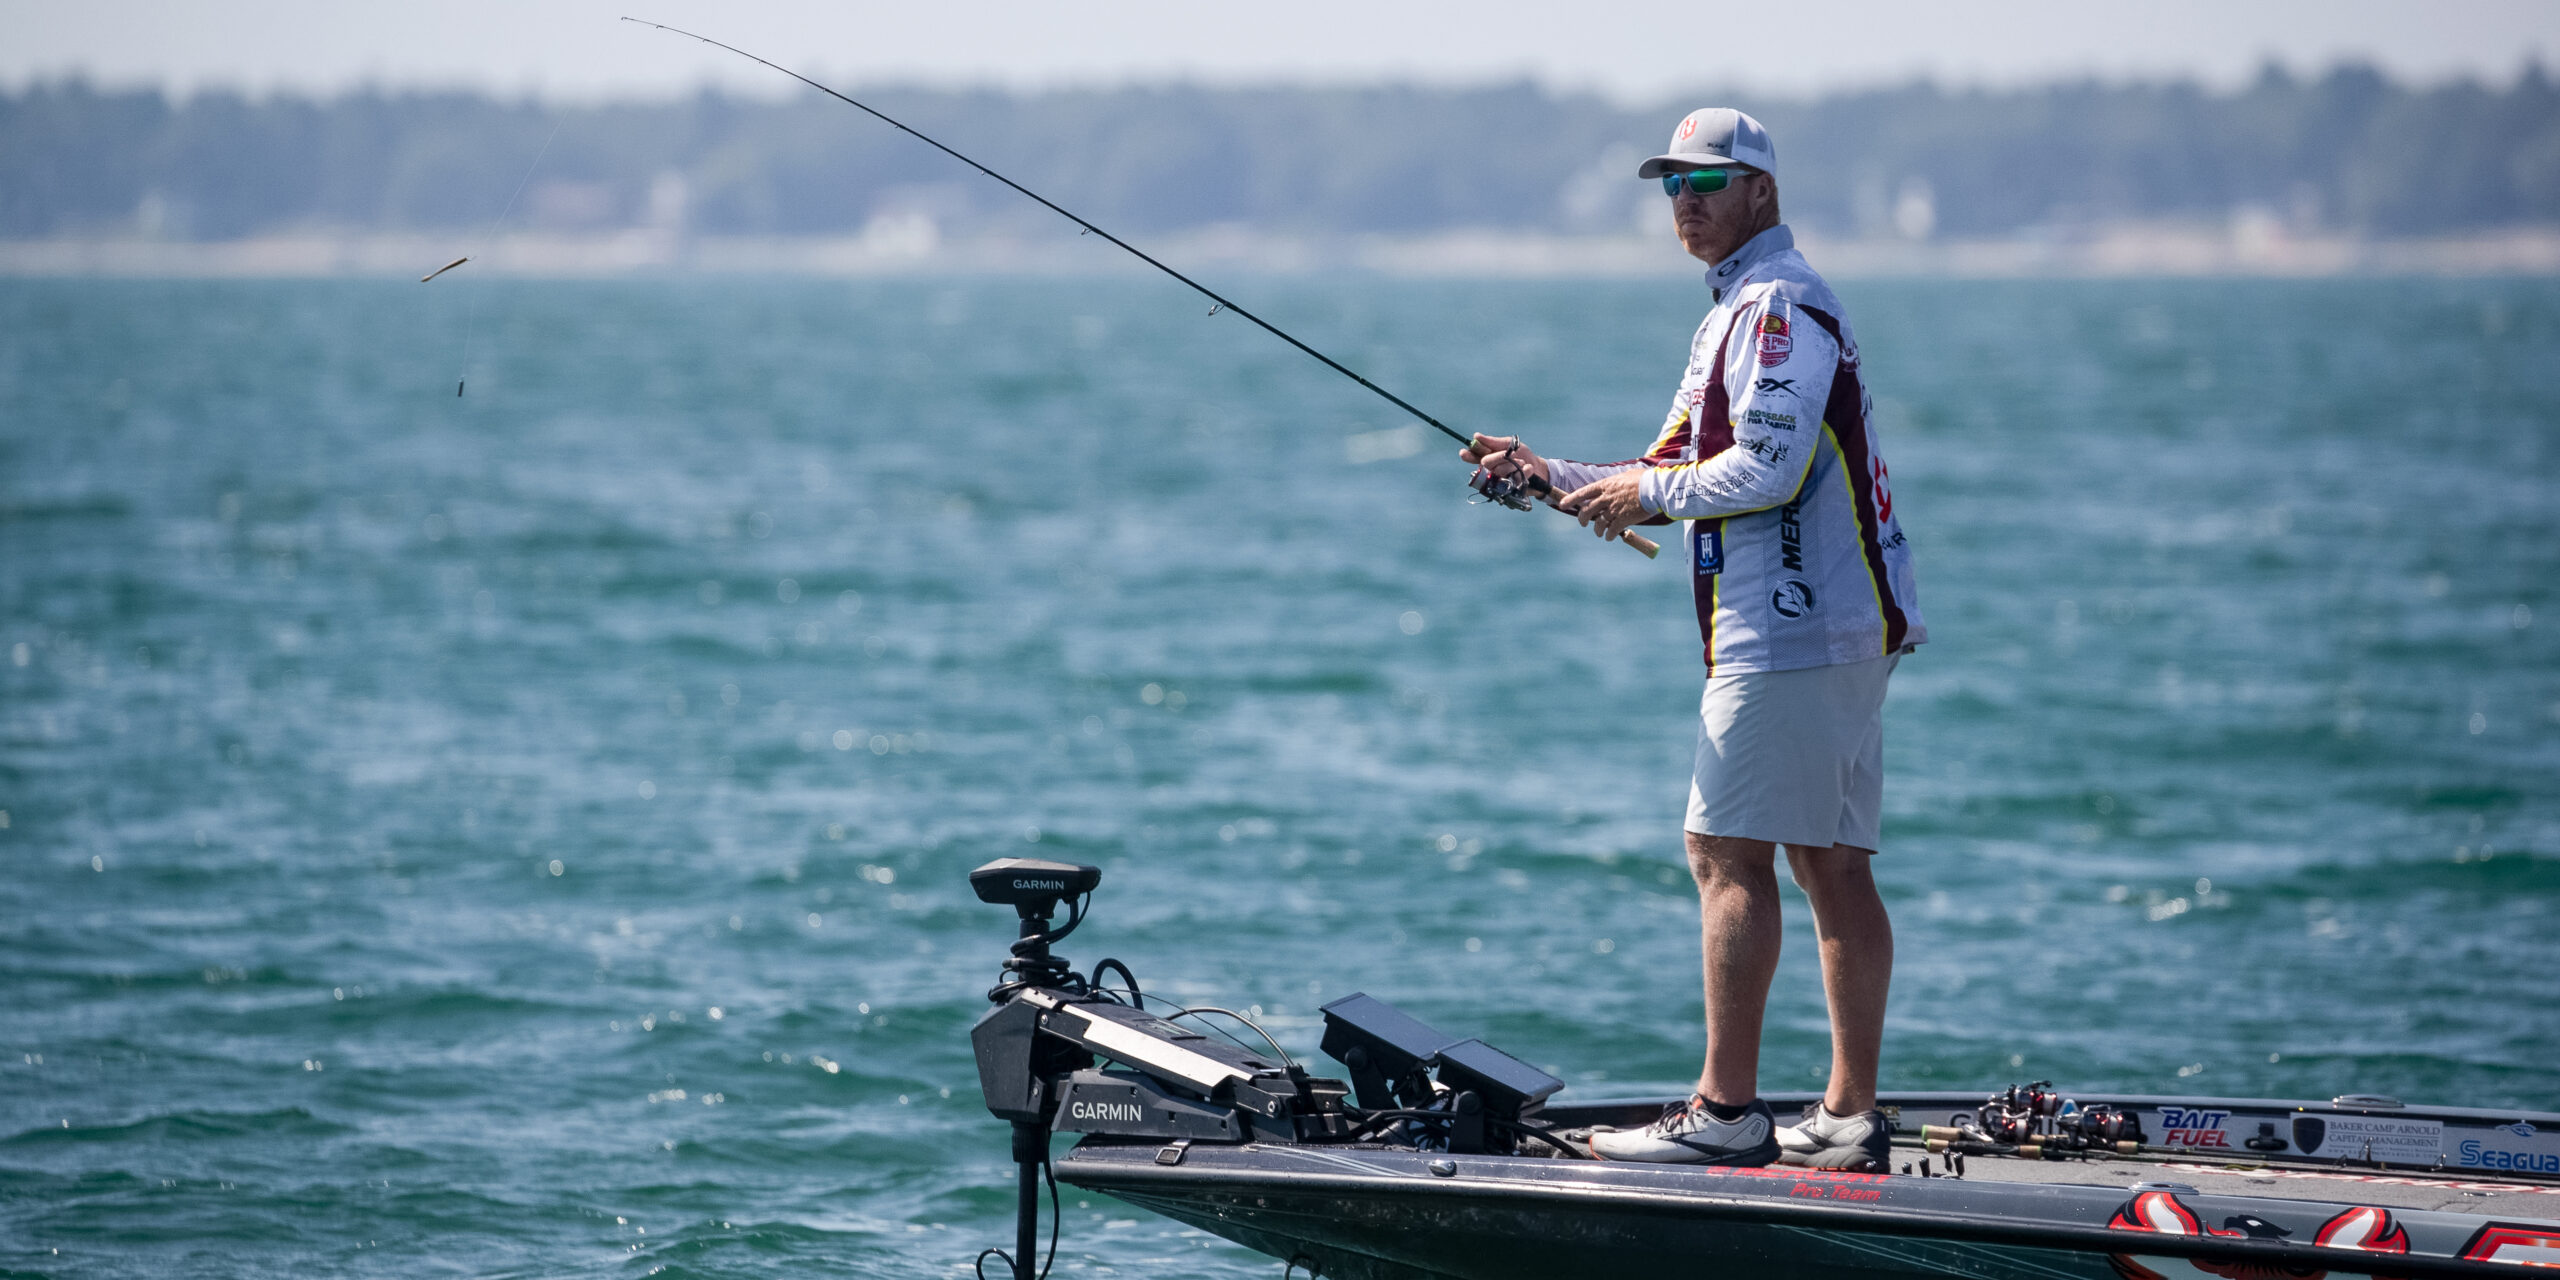 Wrangler Aims to Reel in Anglers With Its New Fishing Apparel